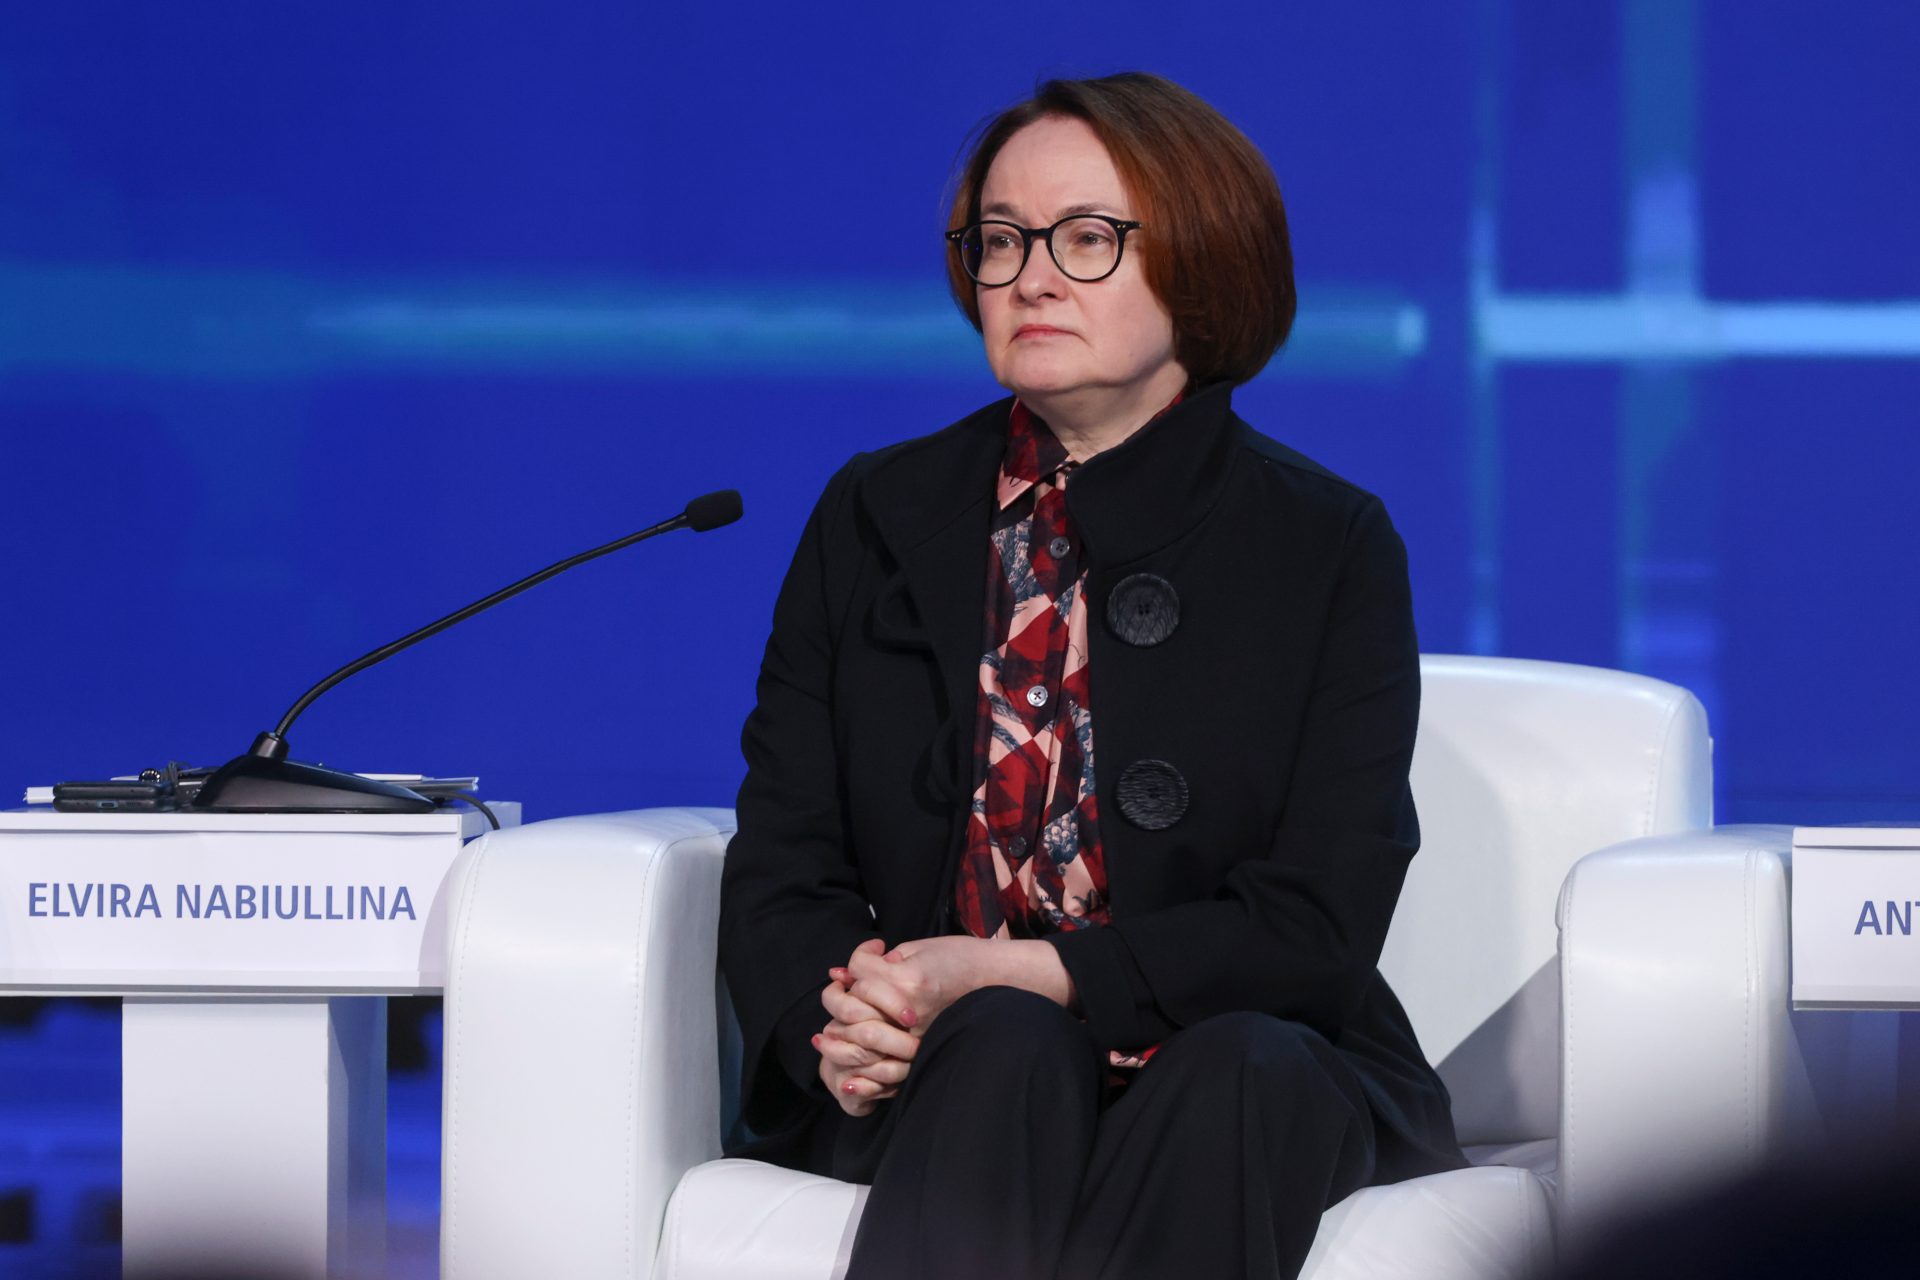 Nabiullina saved Russia from economic collapse